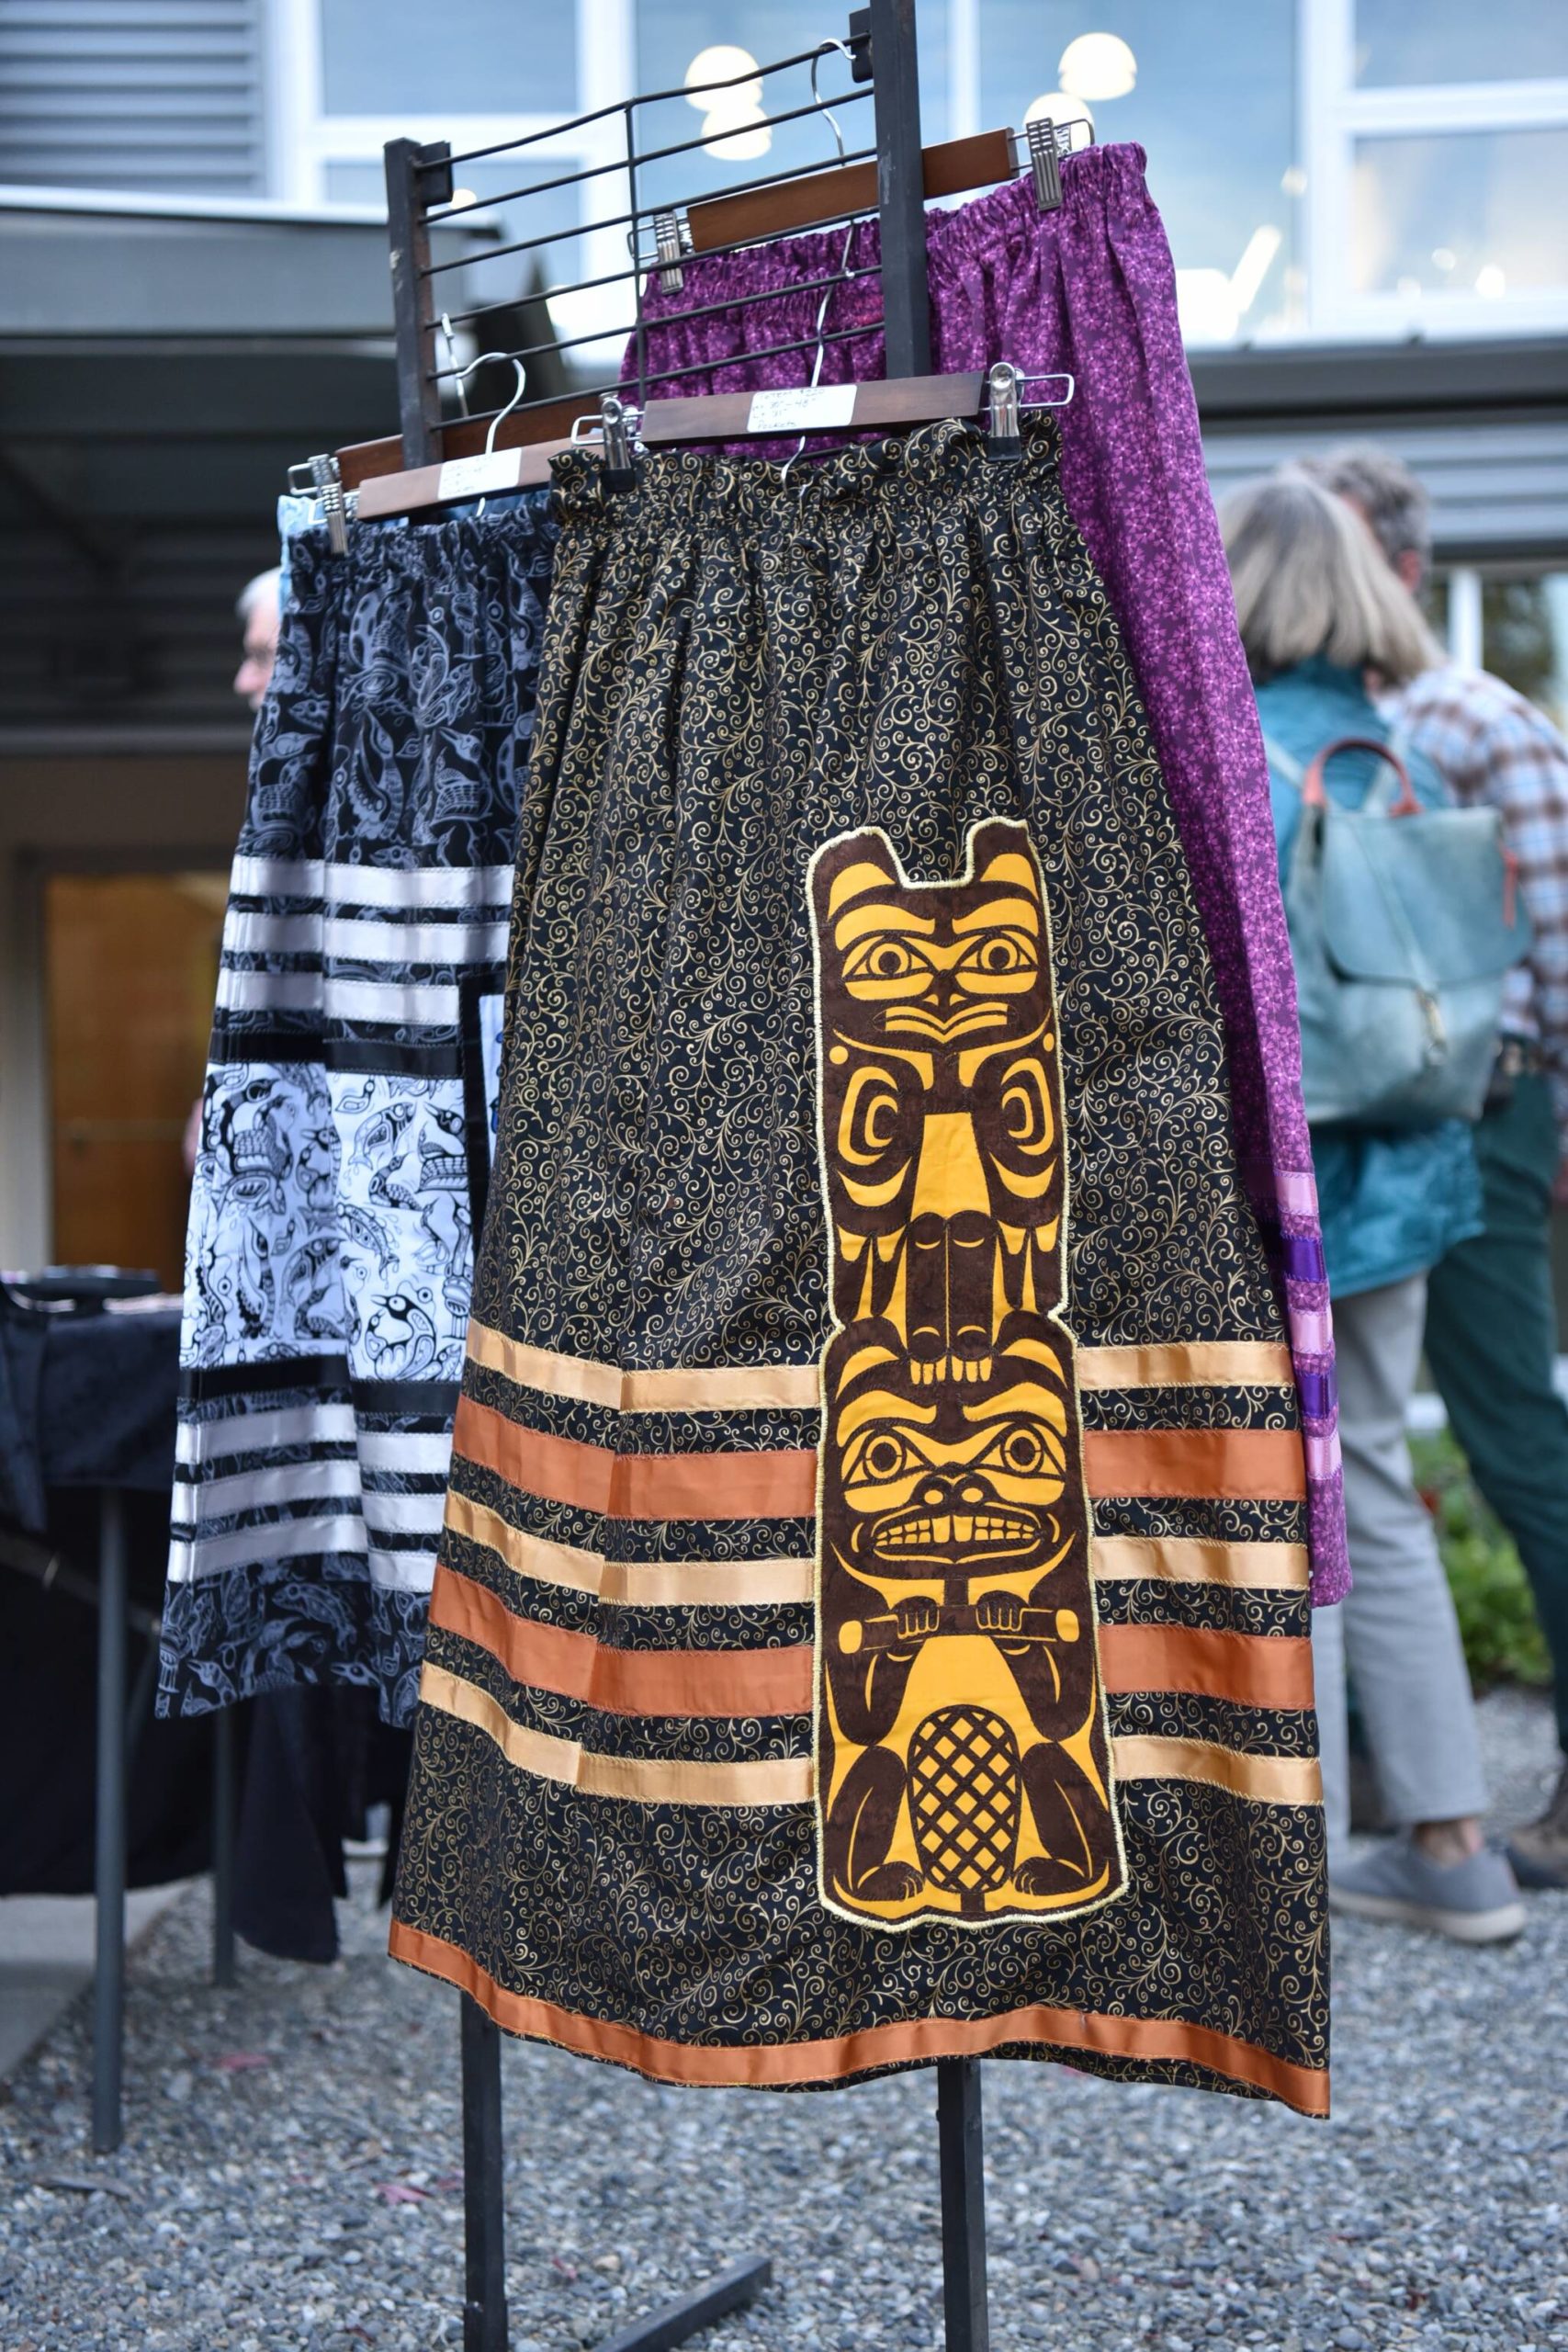 Ribbon skirts on display with a totem applique.